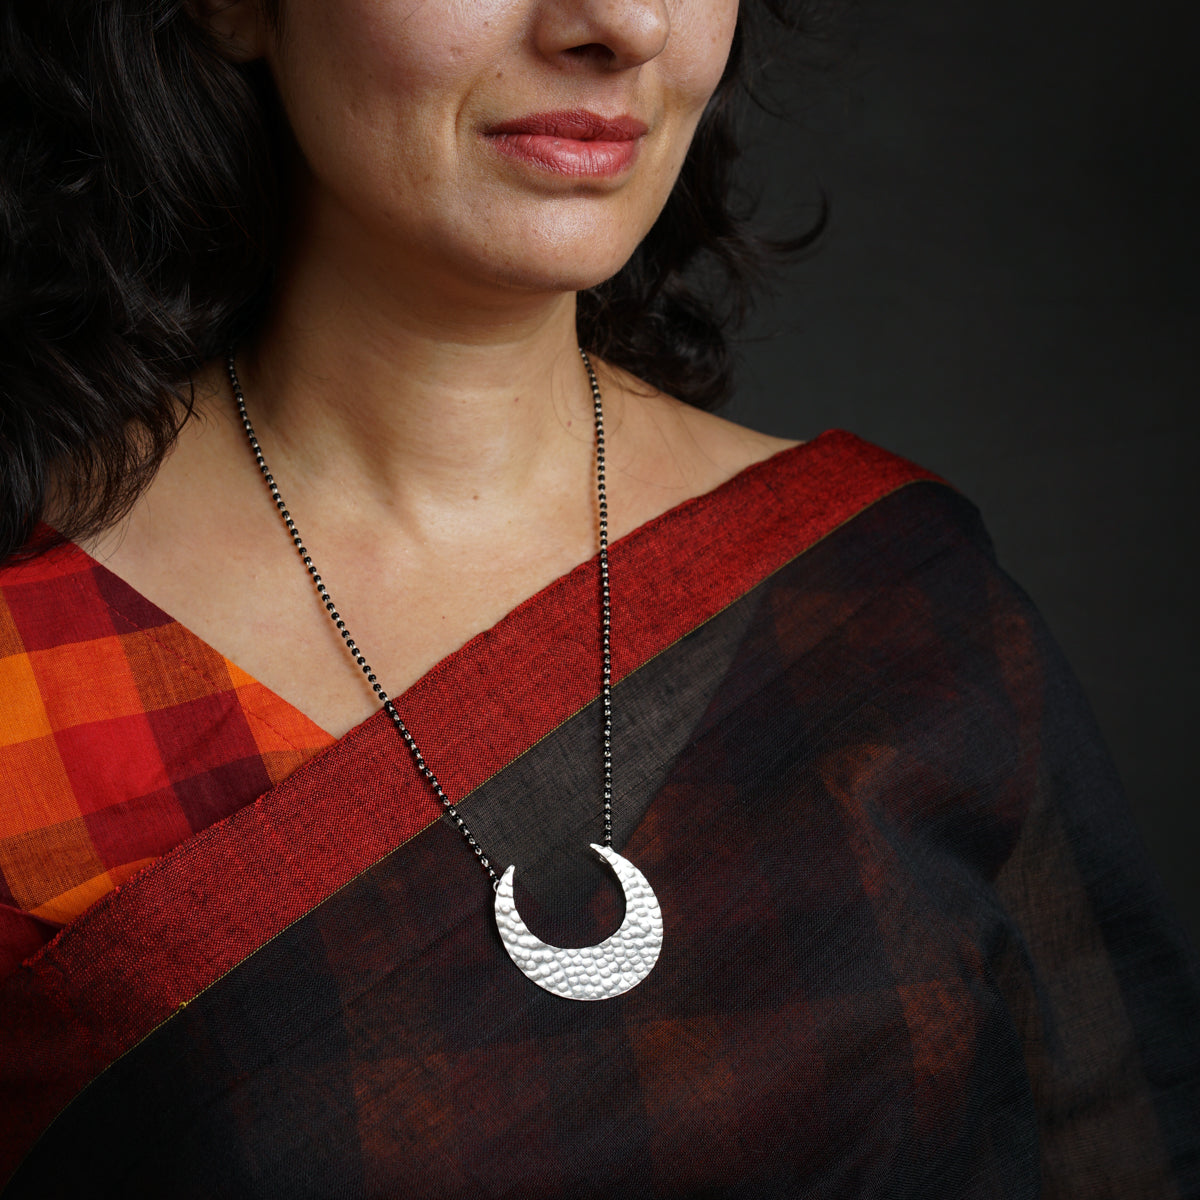 a woman wearing a black and red sari with a crescent pendant